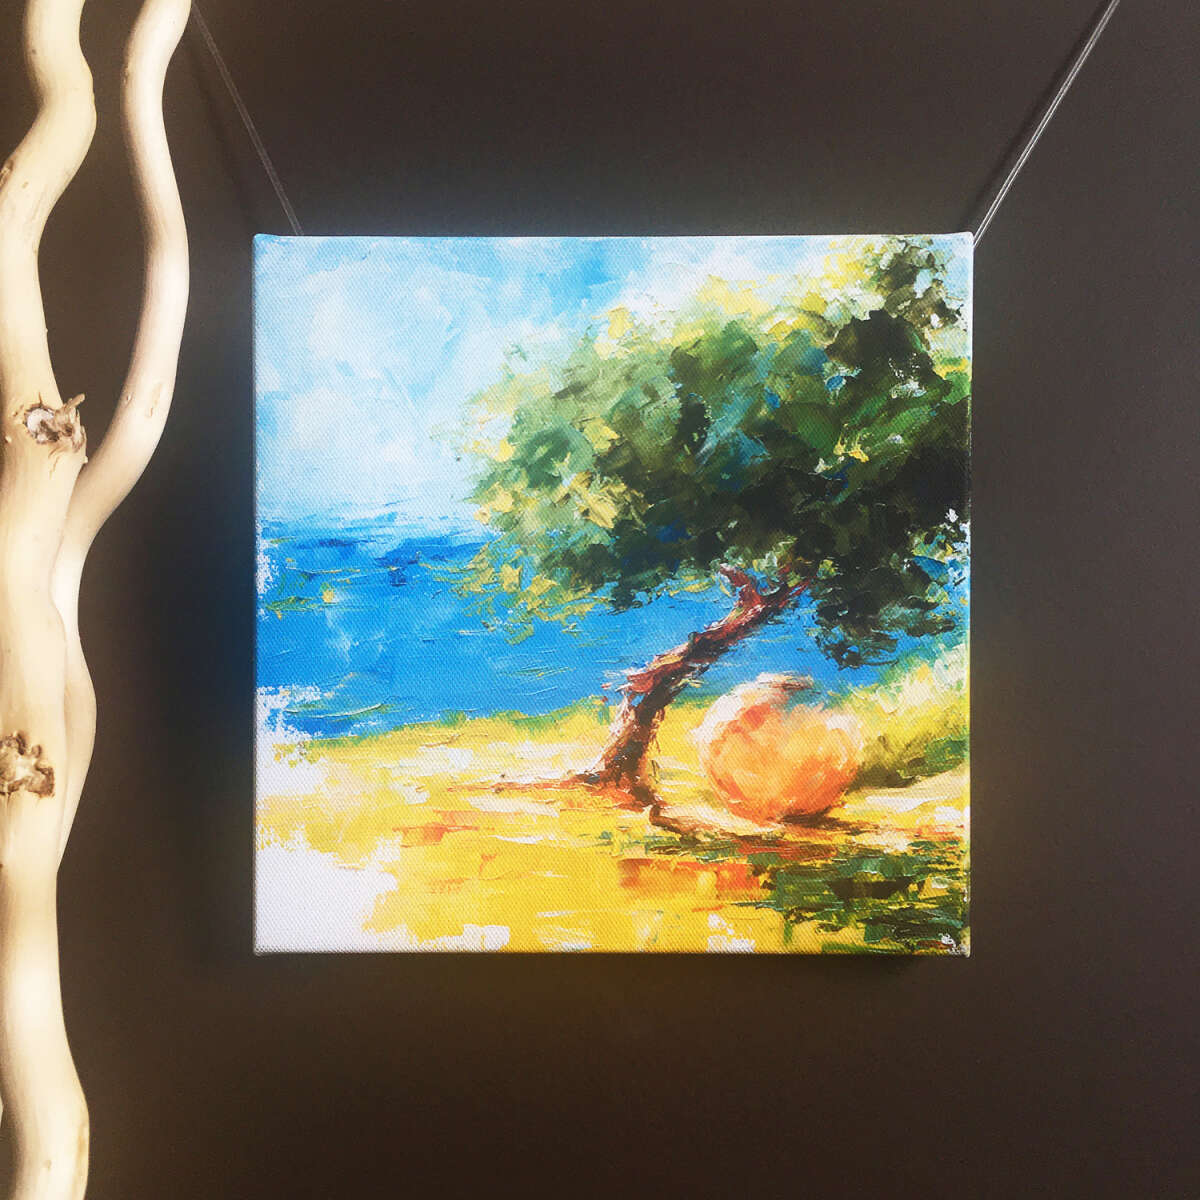 Giclee print of "The Olive Tree" 20x20